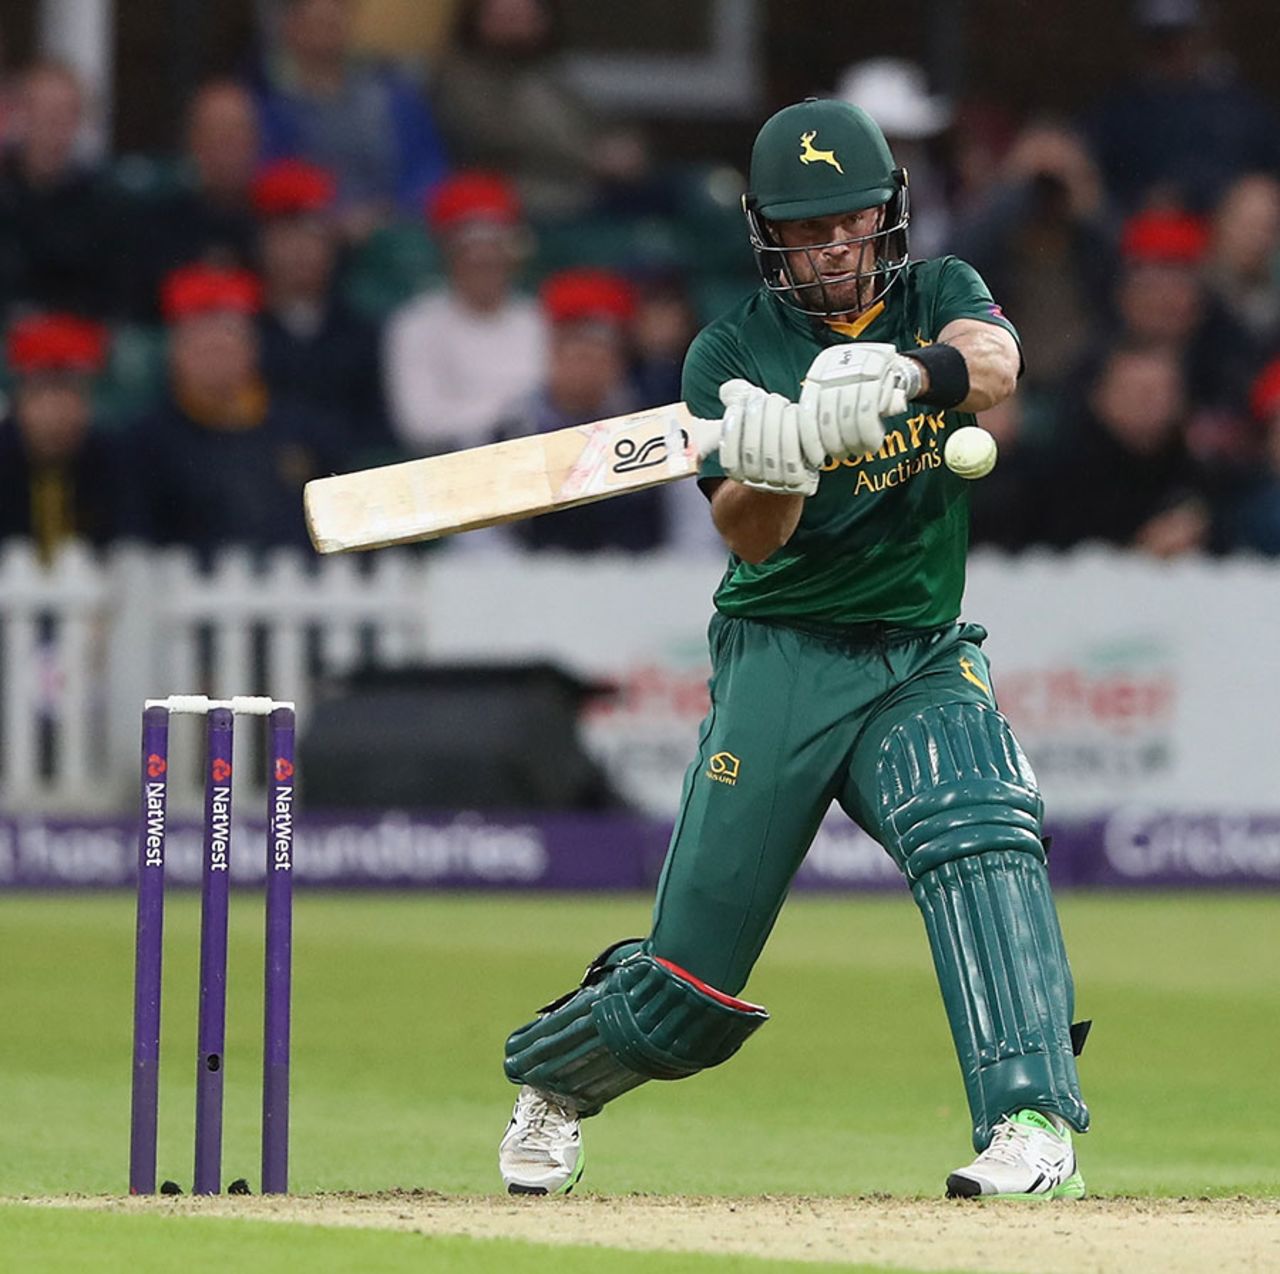 Dan Christian's contributions with bat and ball have been key for Notts, Worcestershire v Notts, NatWest Blast, North Group, Worcester, August 13, 2017